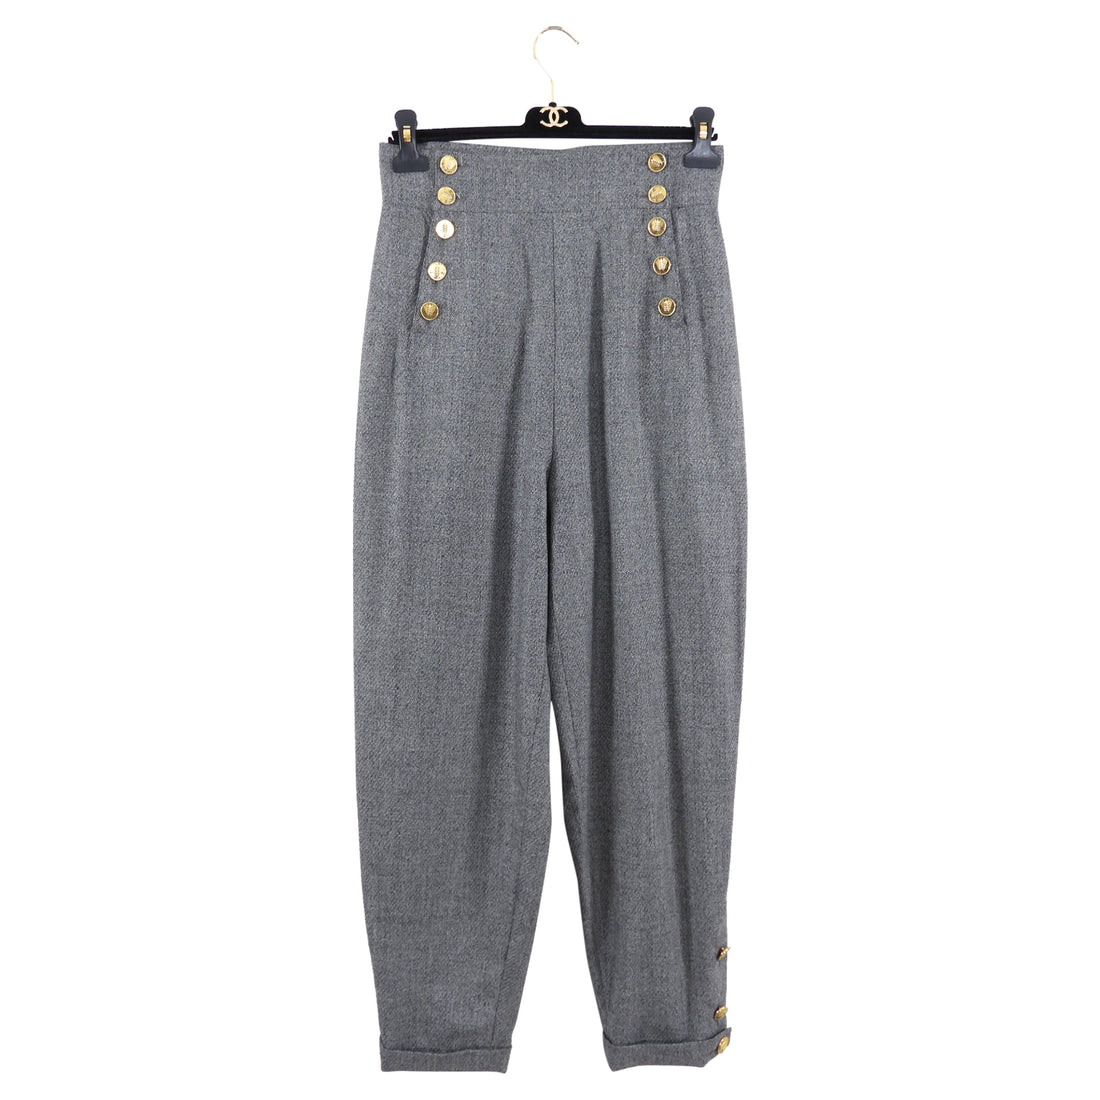 Chanel Vintage 1987 Grey high Waist Pants with Gold Wheat CC Buttons - FR42 / M